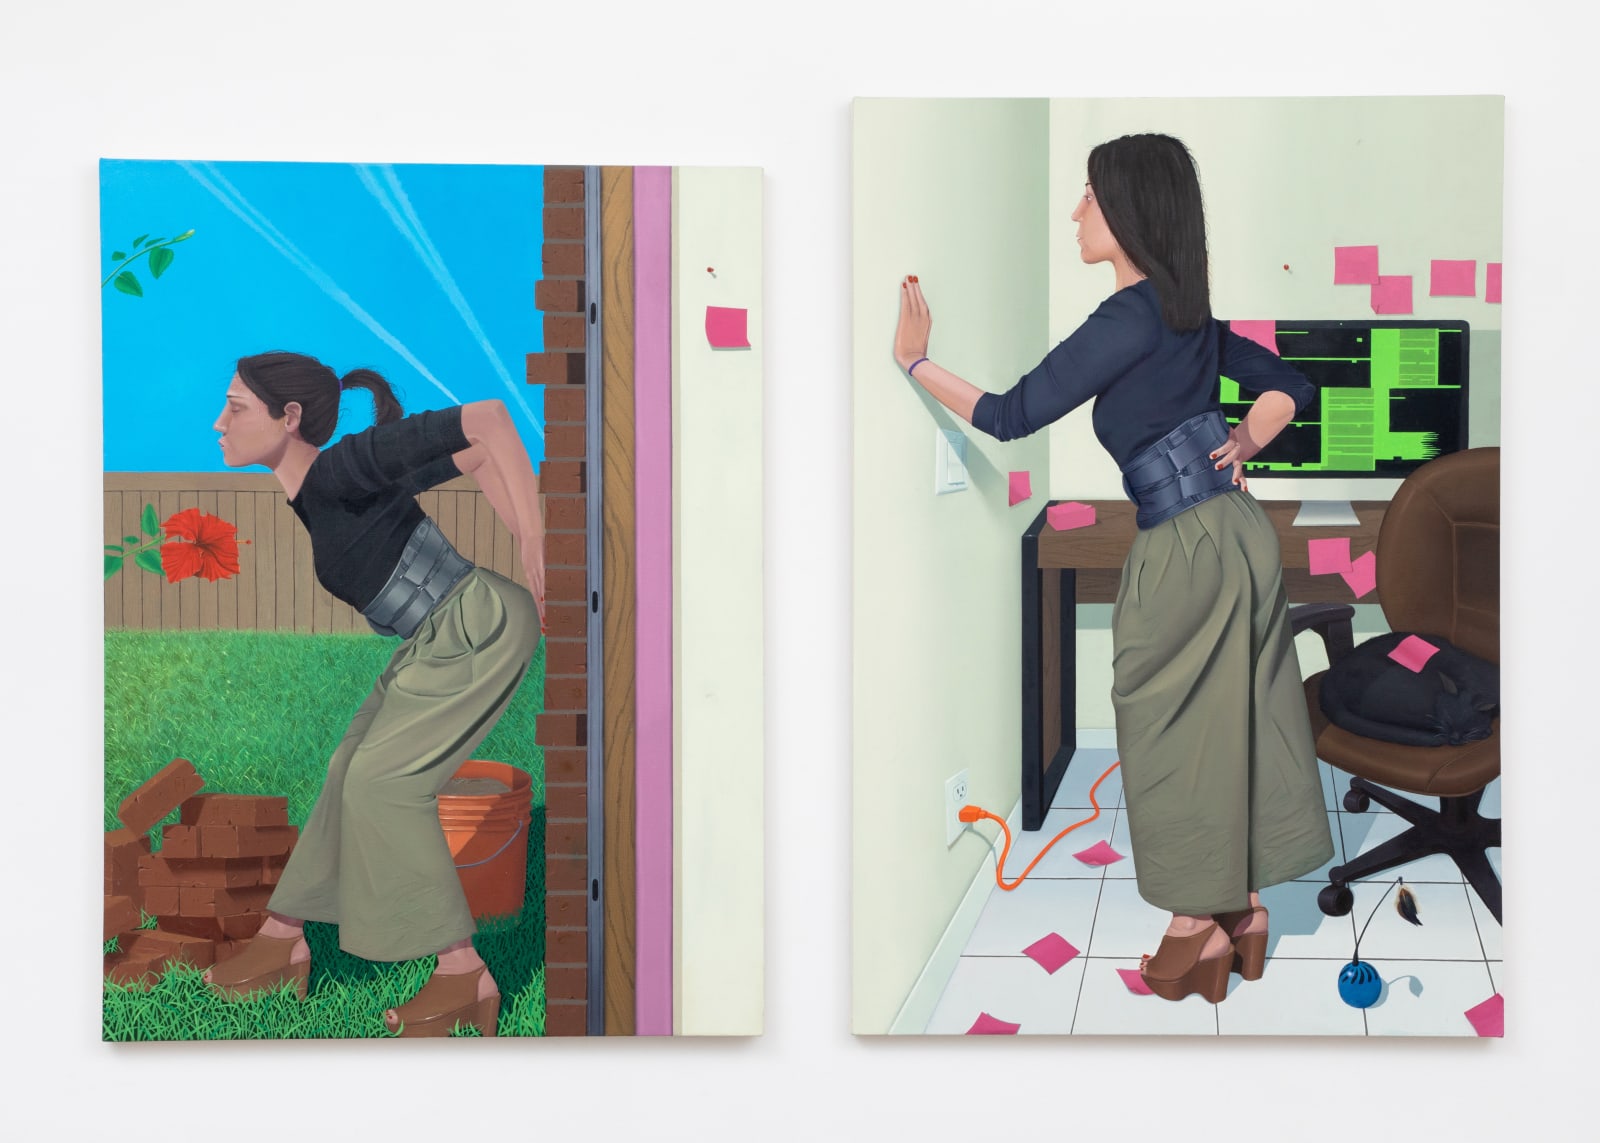 Diptych paintings showing a young woman in each, one in an outdoor setting leaning against or supporting a brick wall, while the other indoors next to her workstation placing her hand against the wall towards the other.